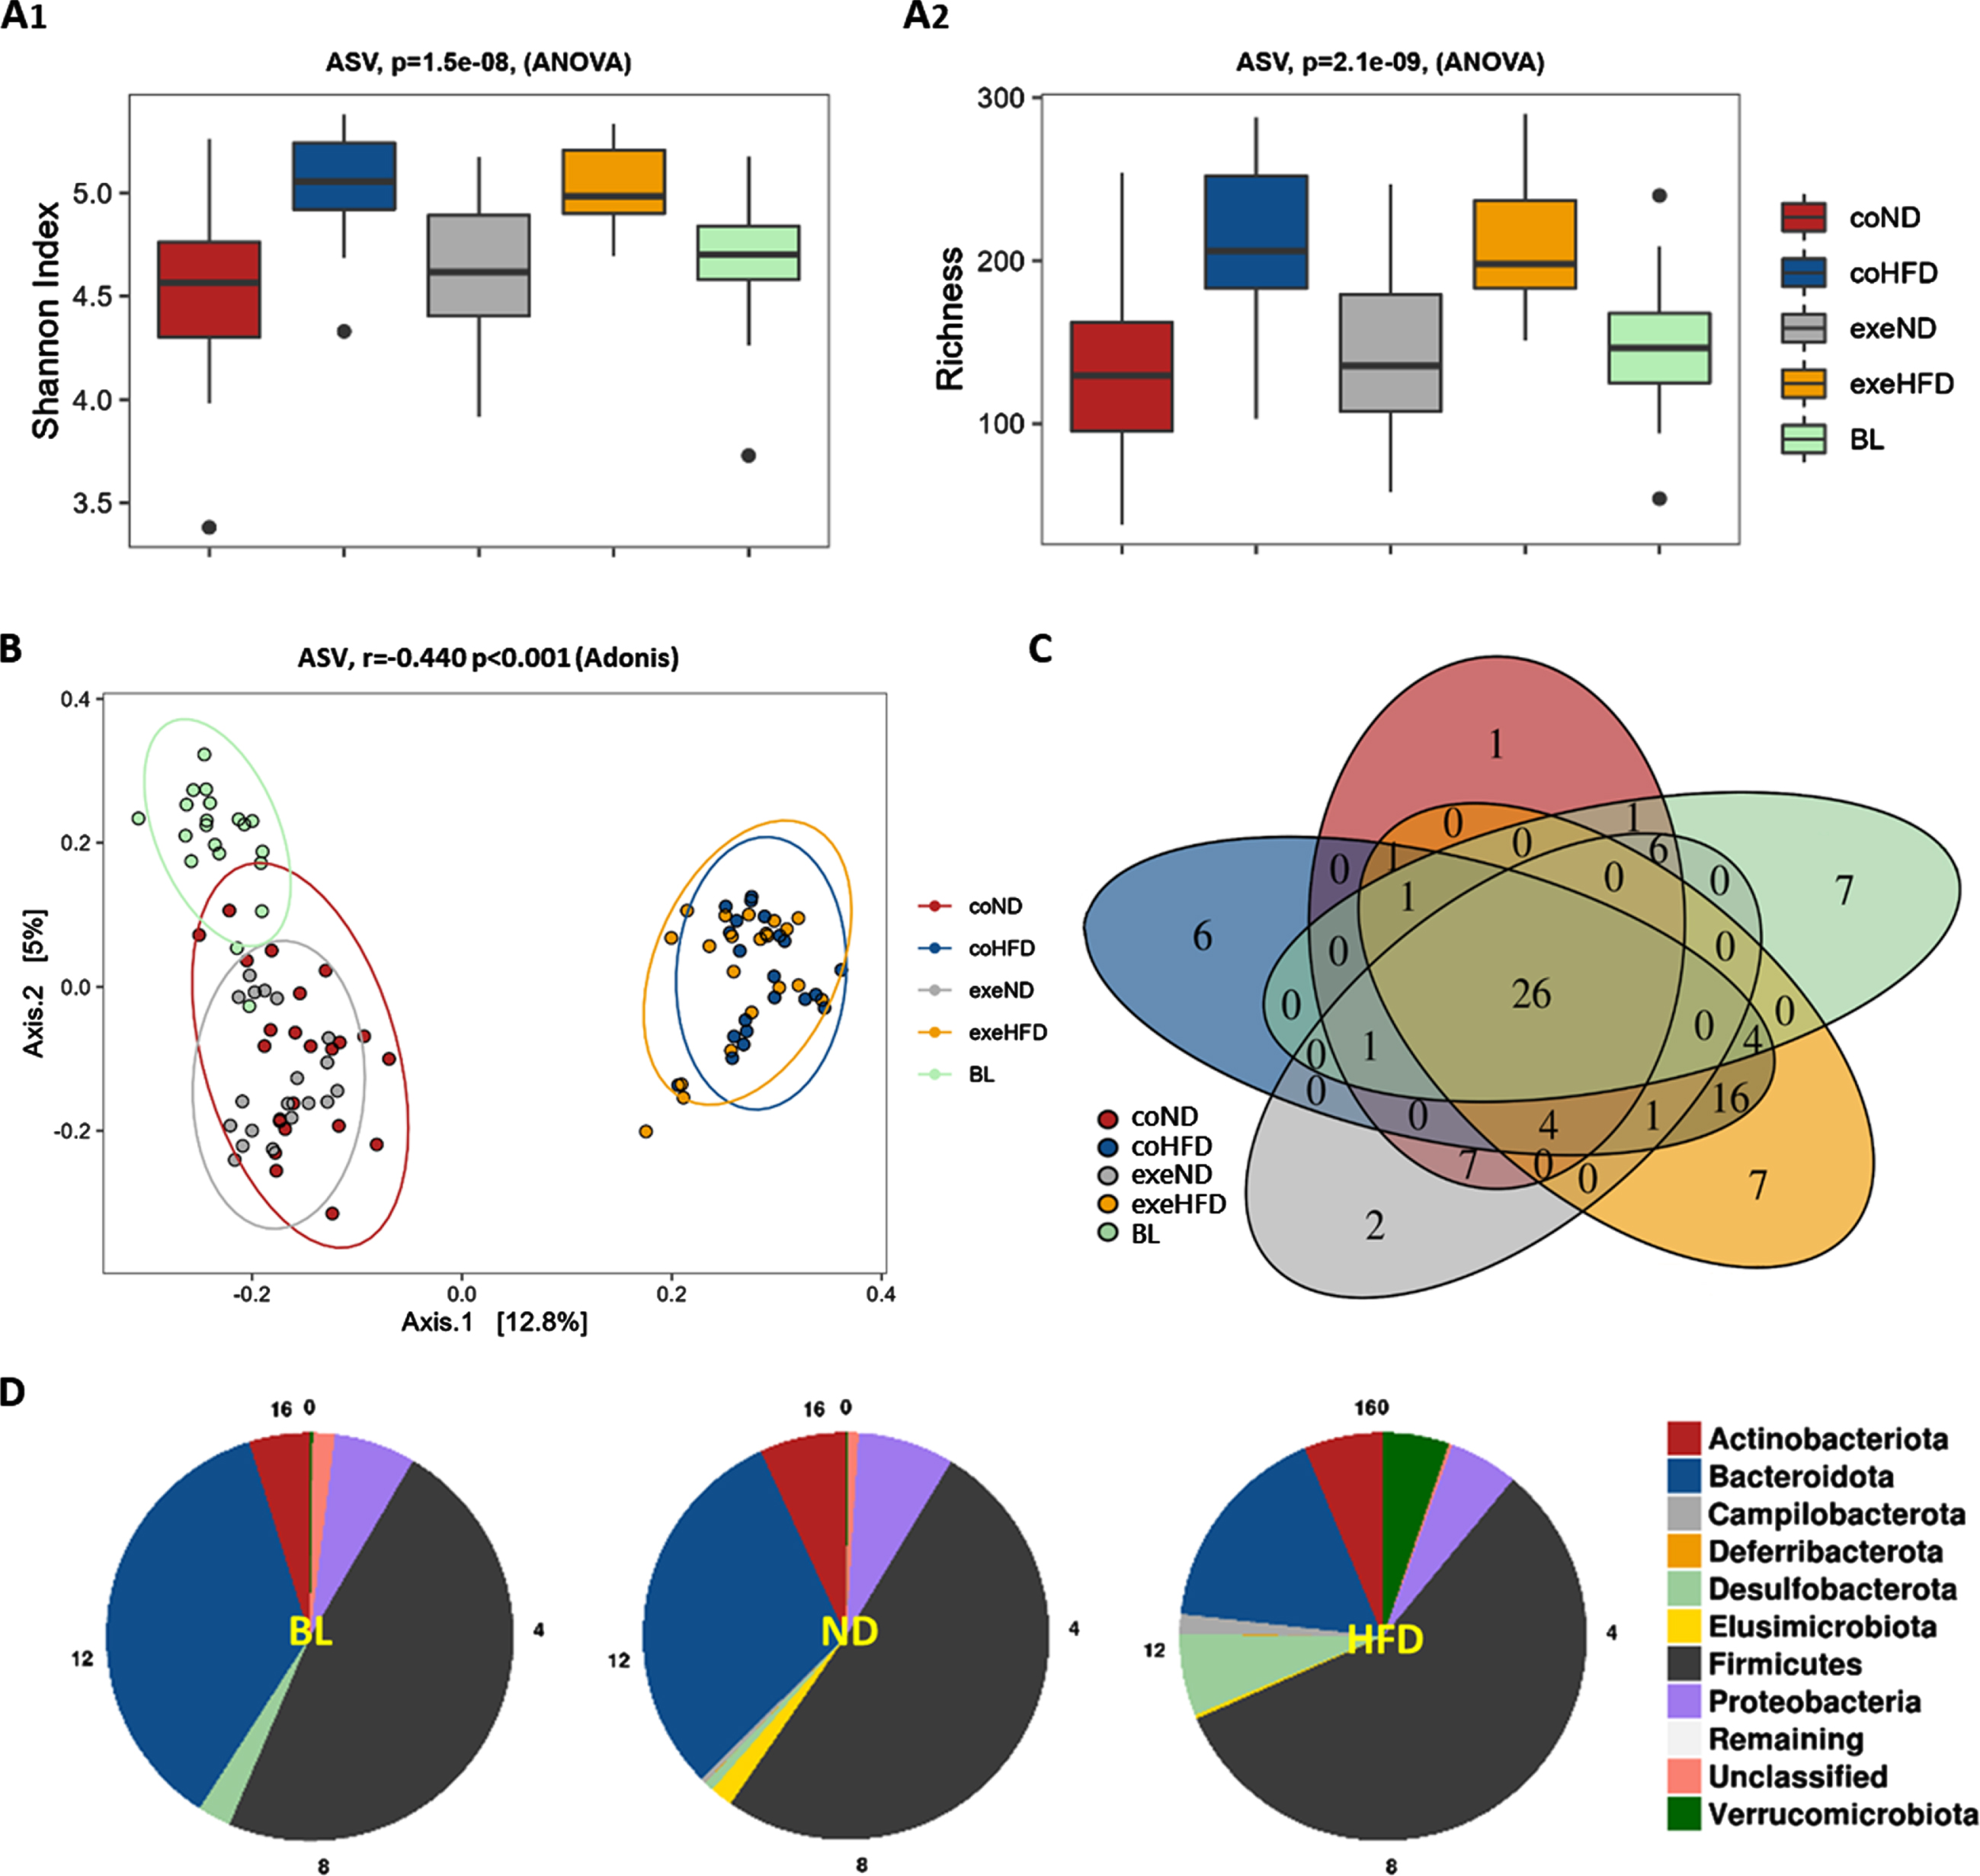 Microbiome alpha and beta diversity analysis from feces of all rat study groups. (A) Shannon Index (A1) and richness (A2) for alpha diversity at ASV level. Significance of differences was calculated with the 2-way ANOVA. (B) Principal coordinate analysis (PCoA) for beta diversity at the ASV level. Significance of differences was calculated with Adonis model (Bray-Curtis). (C) Venn diagram of core microbiome depicting unique and shared taxa on genus level between all study groups. (D) Diet-based phylum distribution independent of exercise.